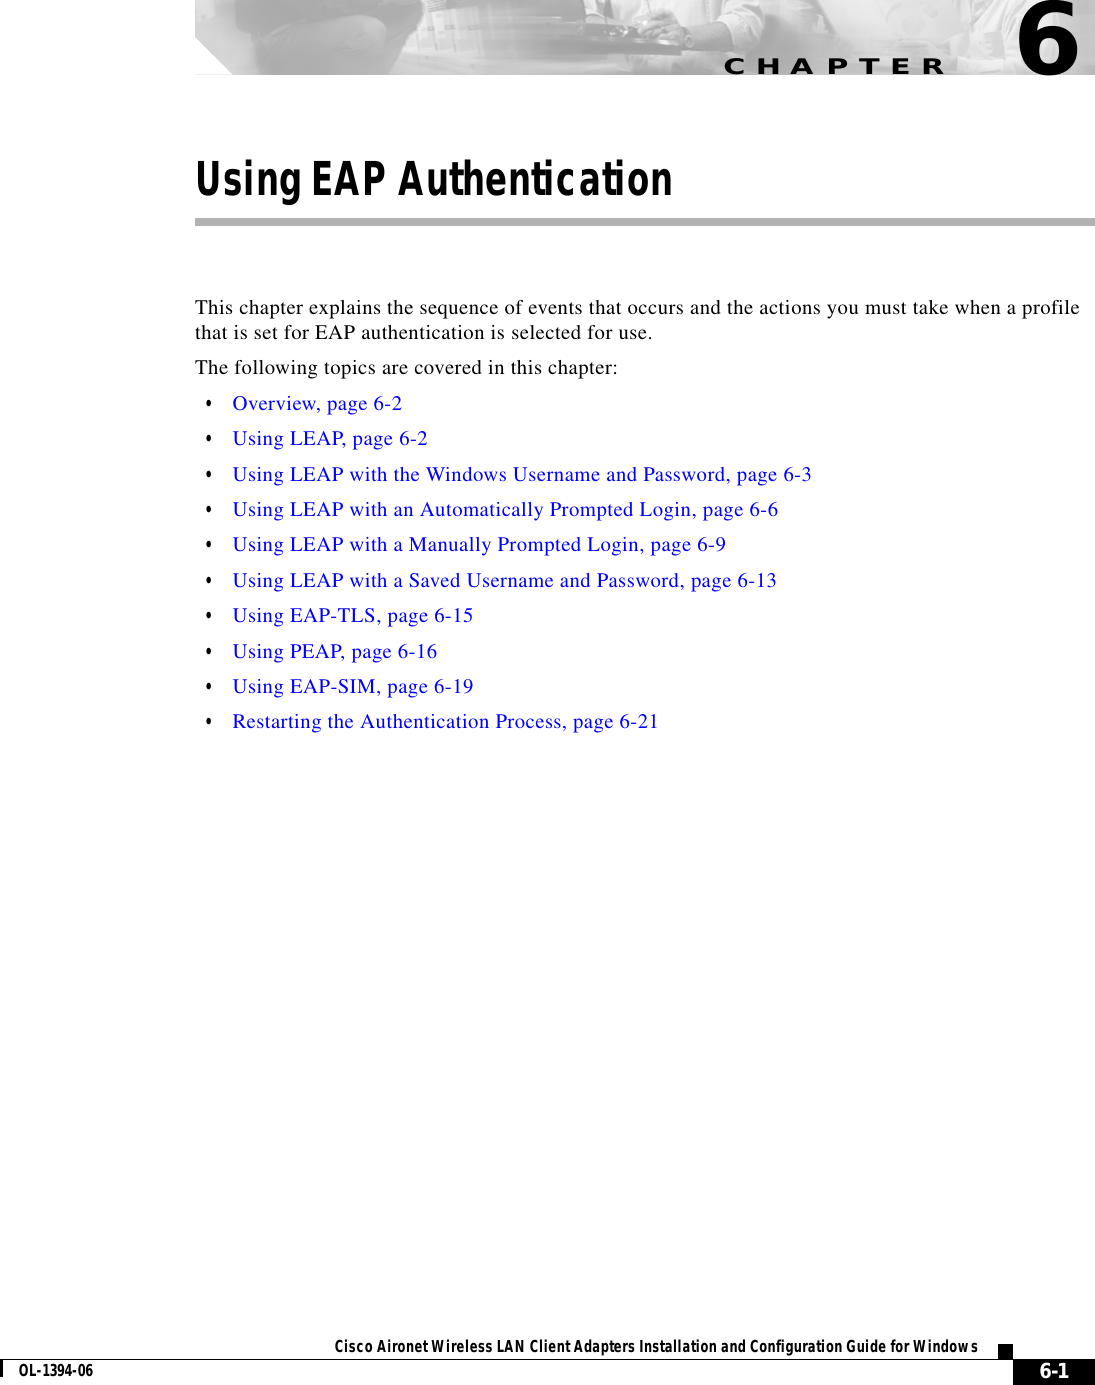 CHAPTER6-1Cisco Aironet Wireless LAN Client Adapters Installation and Configuration Guide for WindowsOL-1394-066Using EAP AuthenticationThis chapter explains the sequence of events that occurs and the actions you must take when a profile that is set for EAP authentication is selected for use.The following topics are covered in this chapter:•Overview, page 6-2•Using LEAP, page 6-2•Using LEAP with the Windows Username and Password, page 6-3•Using LEAP with an Automatically Prompted Login, page 6-6•Using LEAP with a Manually Prompted Login, page 6-9•Using LEAP with a Saved Username and Password, page 6-13•Using EAP-TLS, page 6-15•Using PEAP, page 6-16•Using EAP-SIM, page 6-19•Restarting the Authentication Process, page 6-21